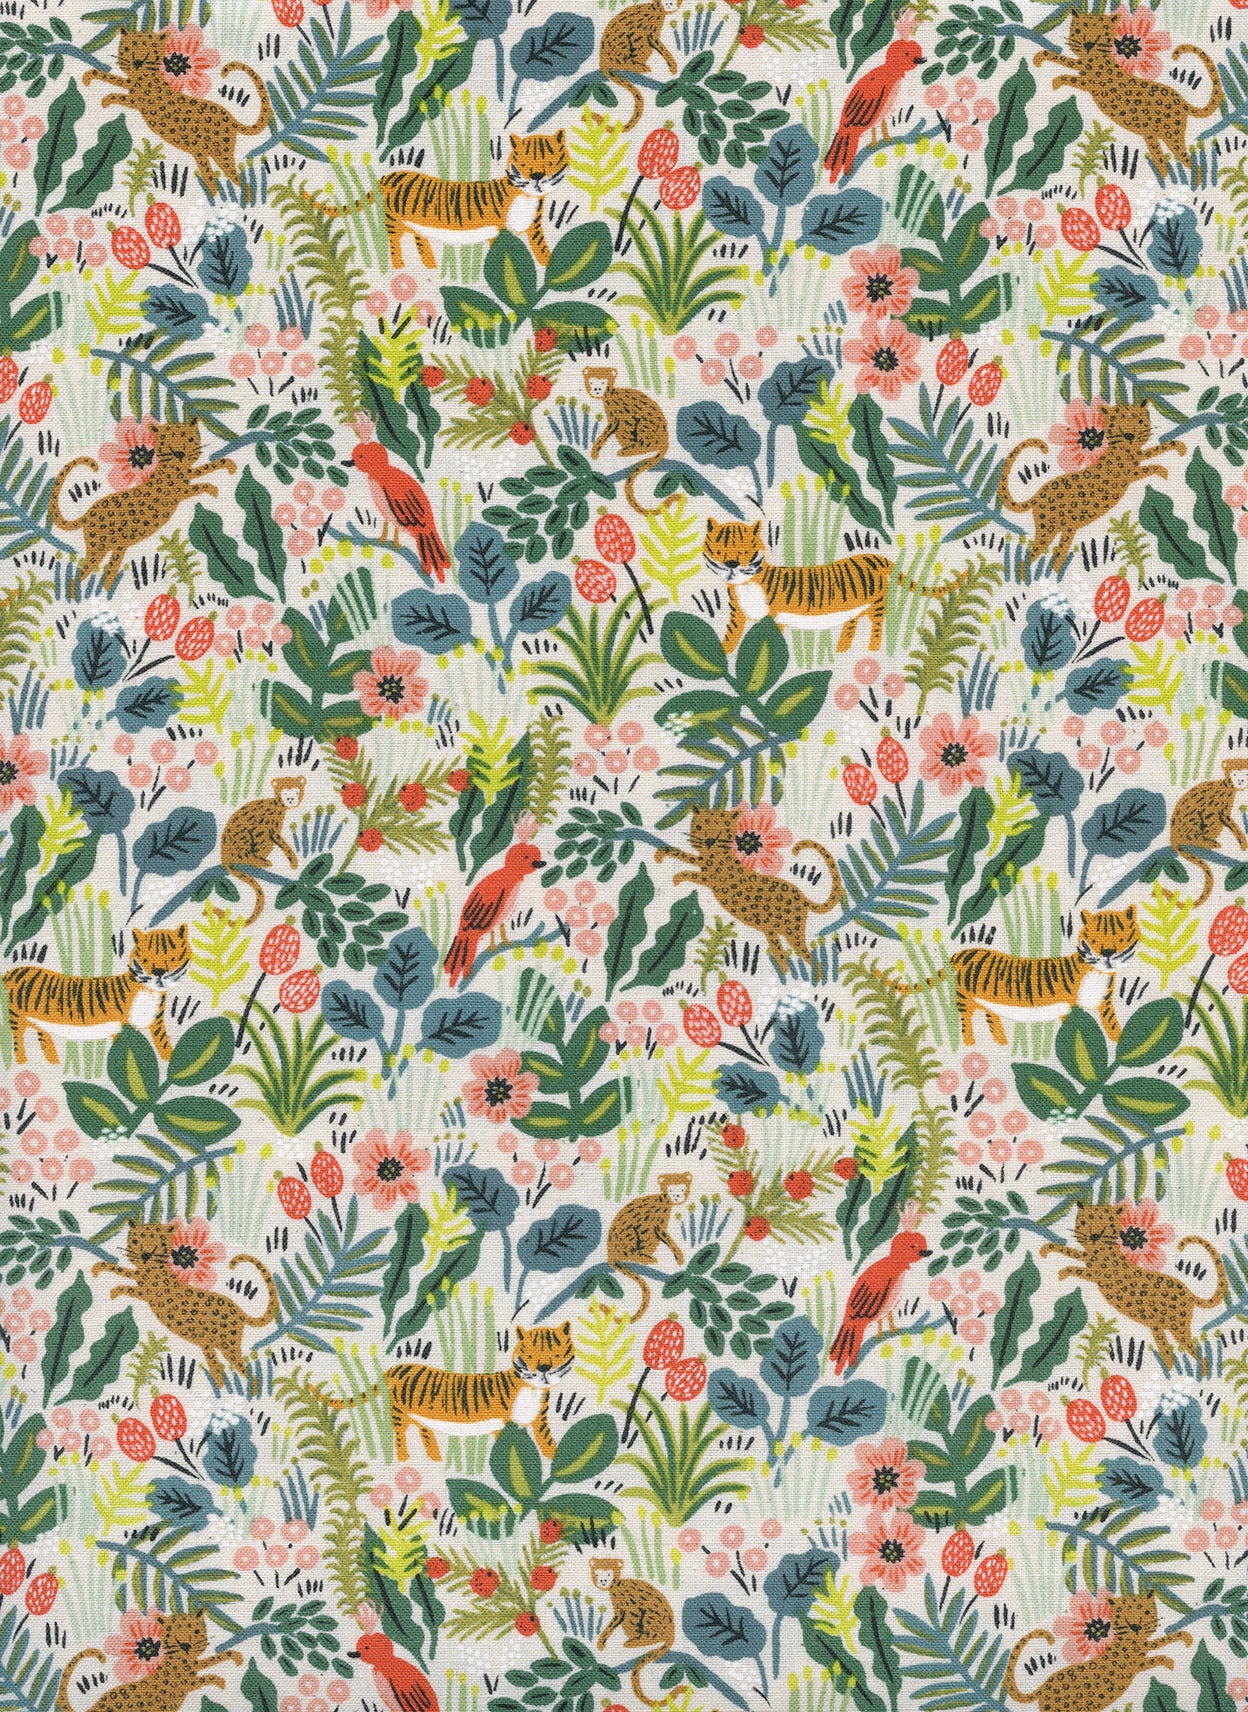 Jungle - Natural - Rifle Paper Co. Menagerie - homesewn